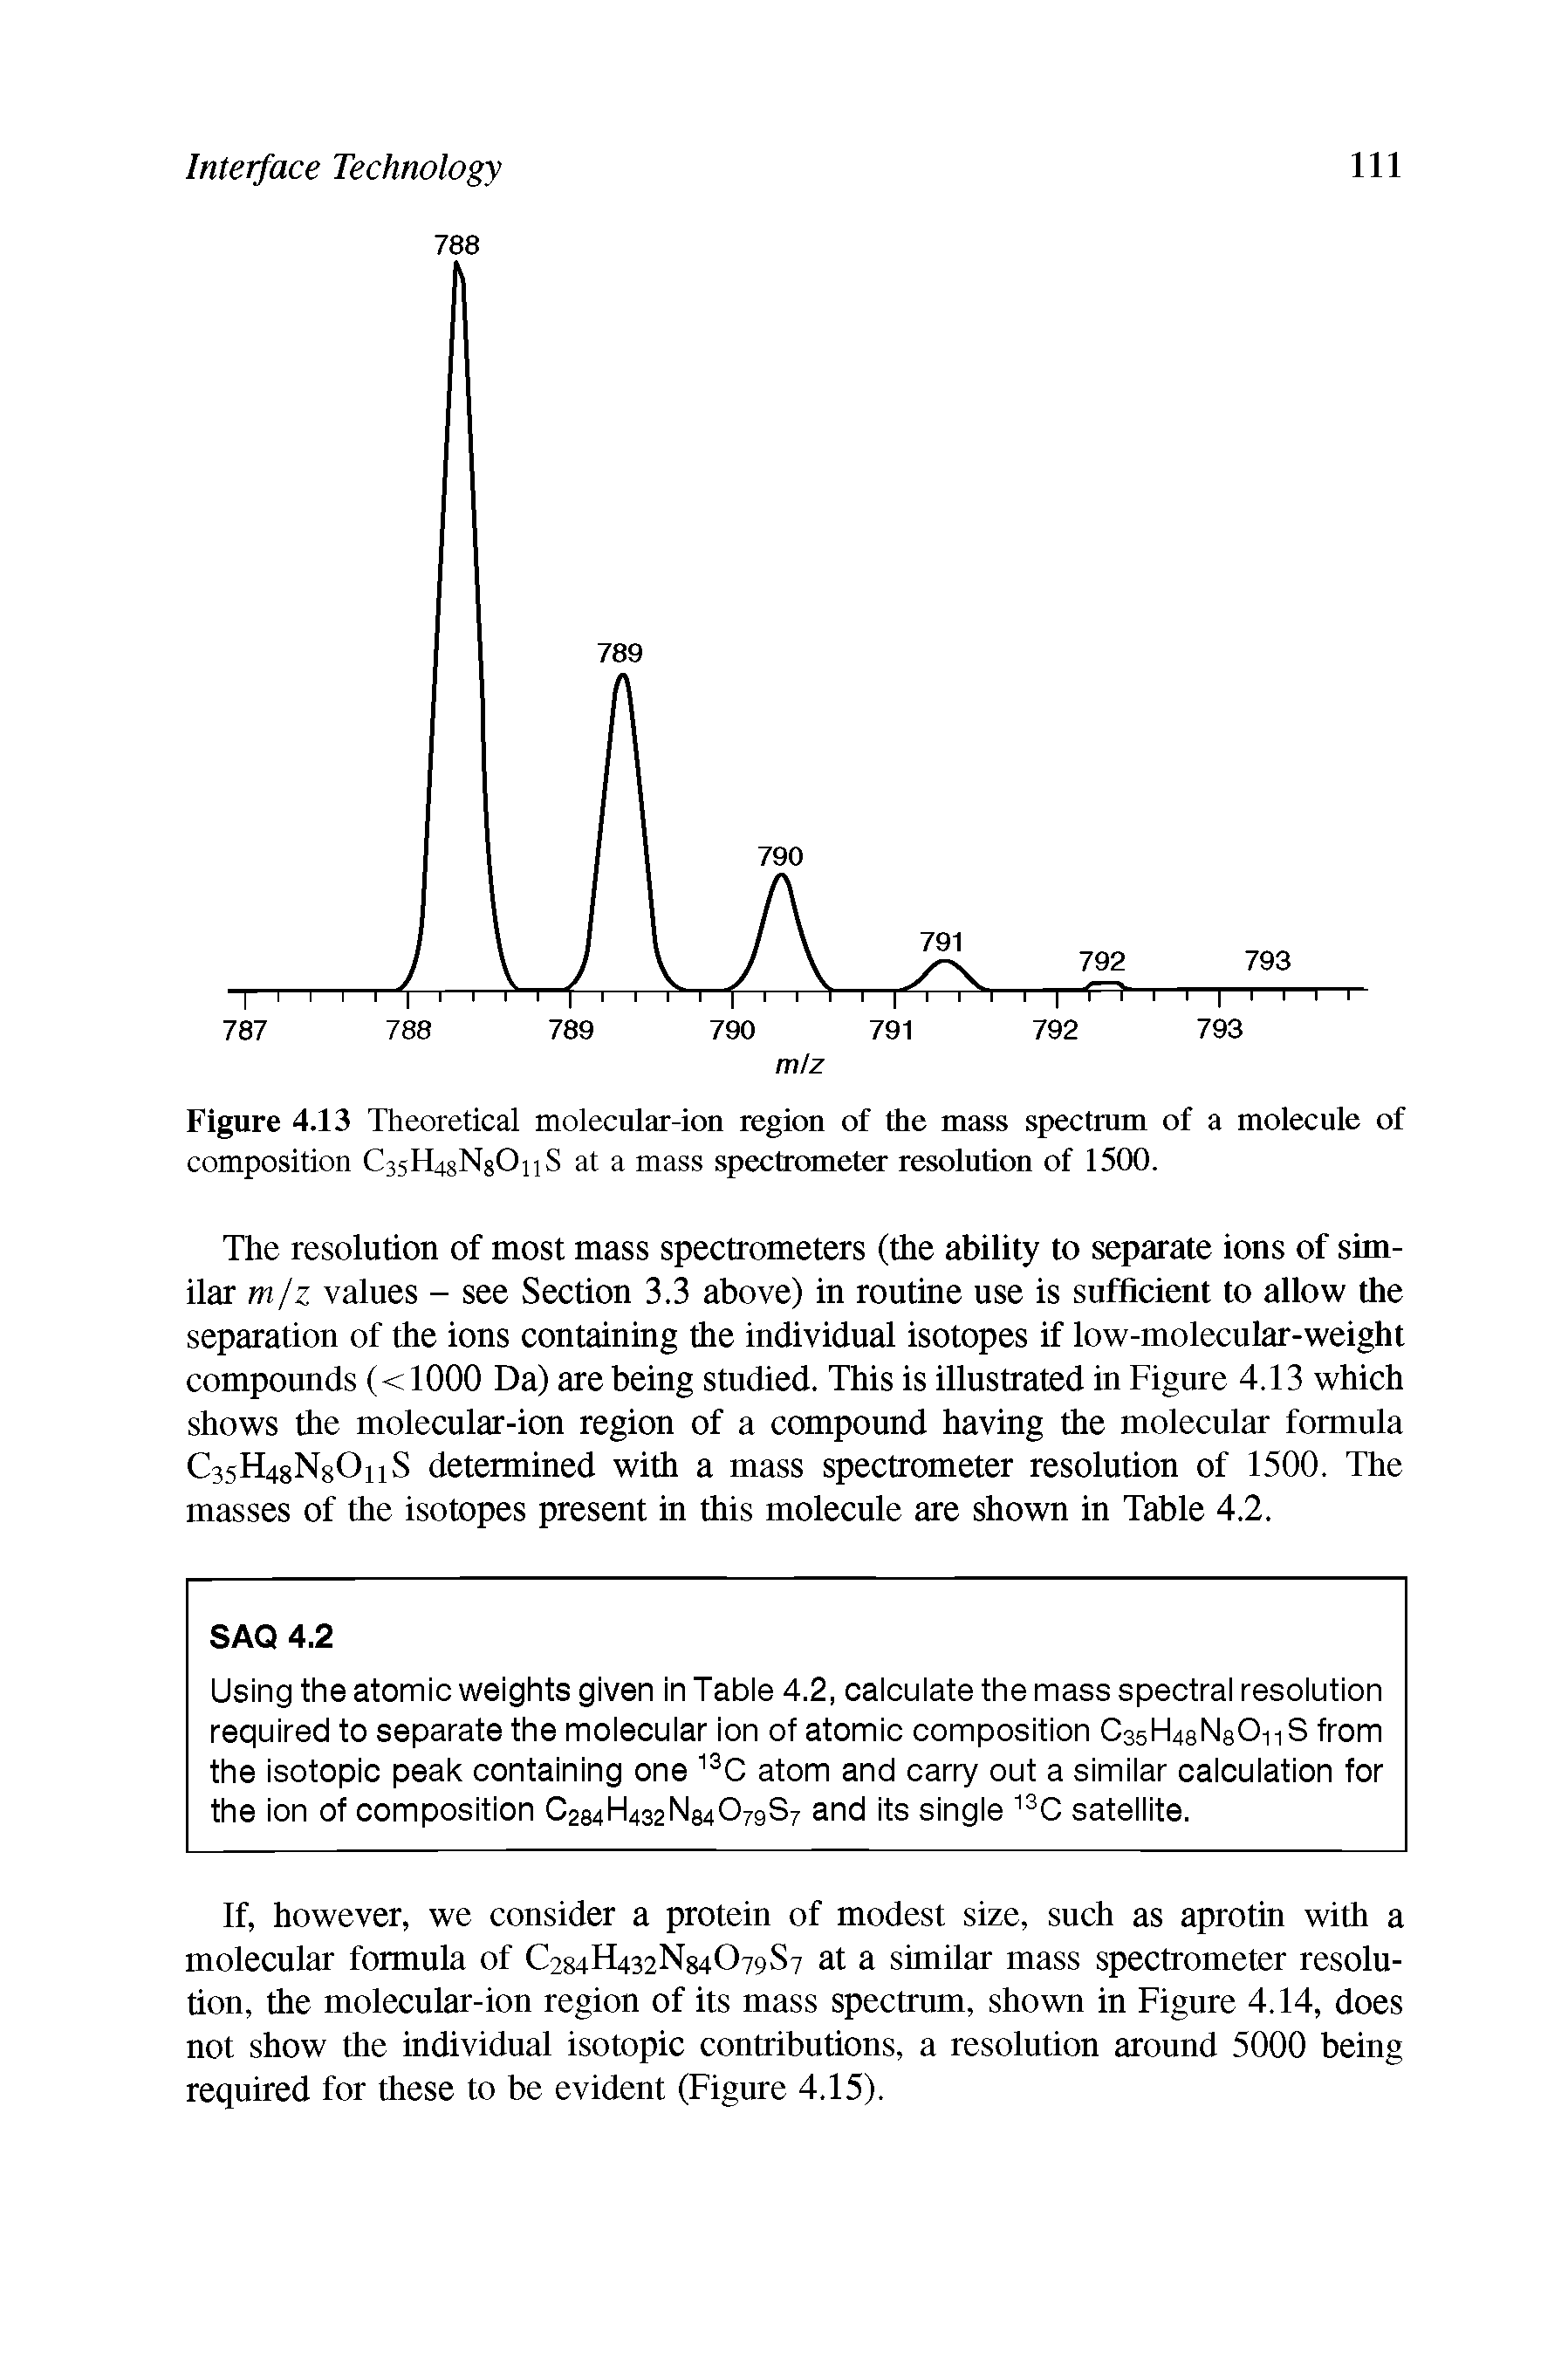 Figure 4.13 Theoretical molecular-ion region of the mass spectrum of a molecule of composition C35H48NgOnS at a mass spectrometer resolution of 1500.